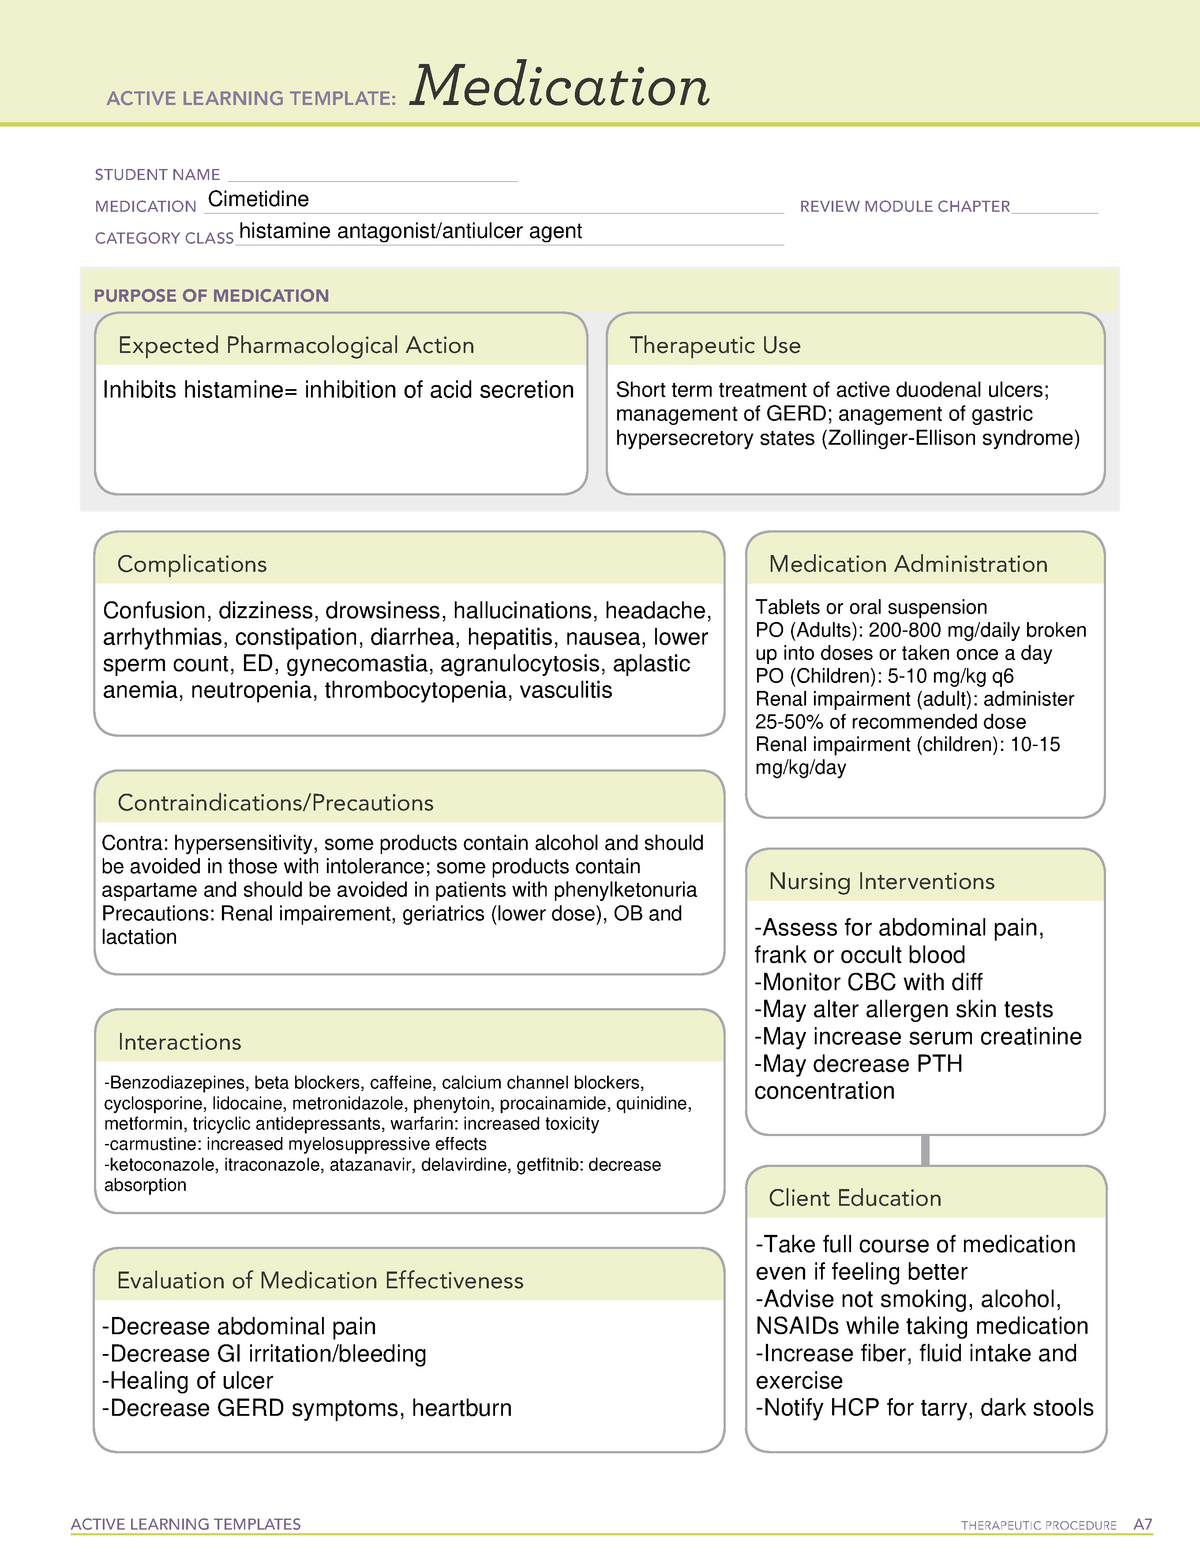 cimetidine-medication-template-active-learning-templates-therapeutic